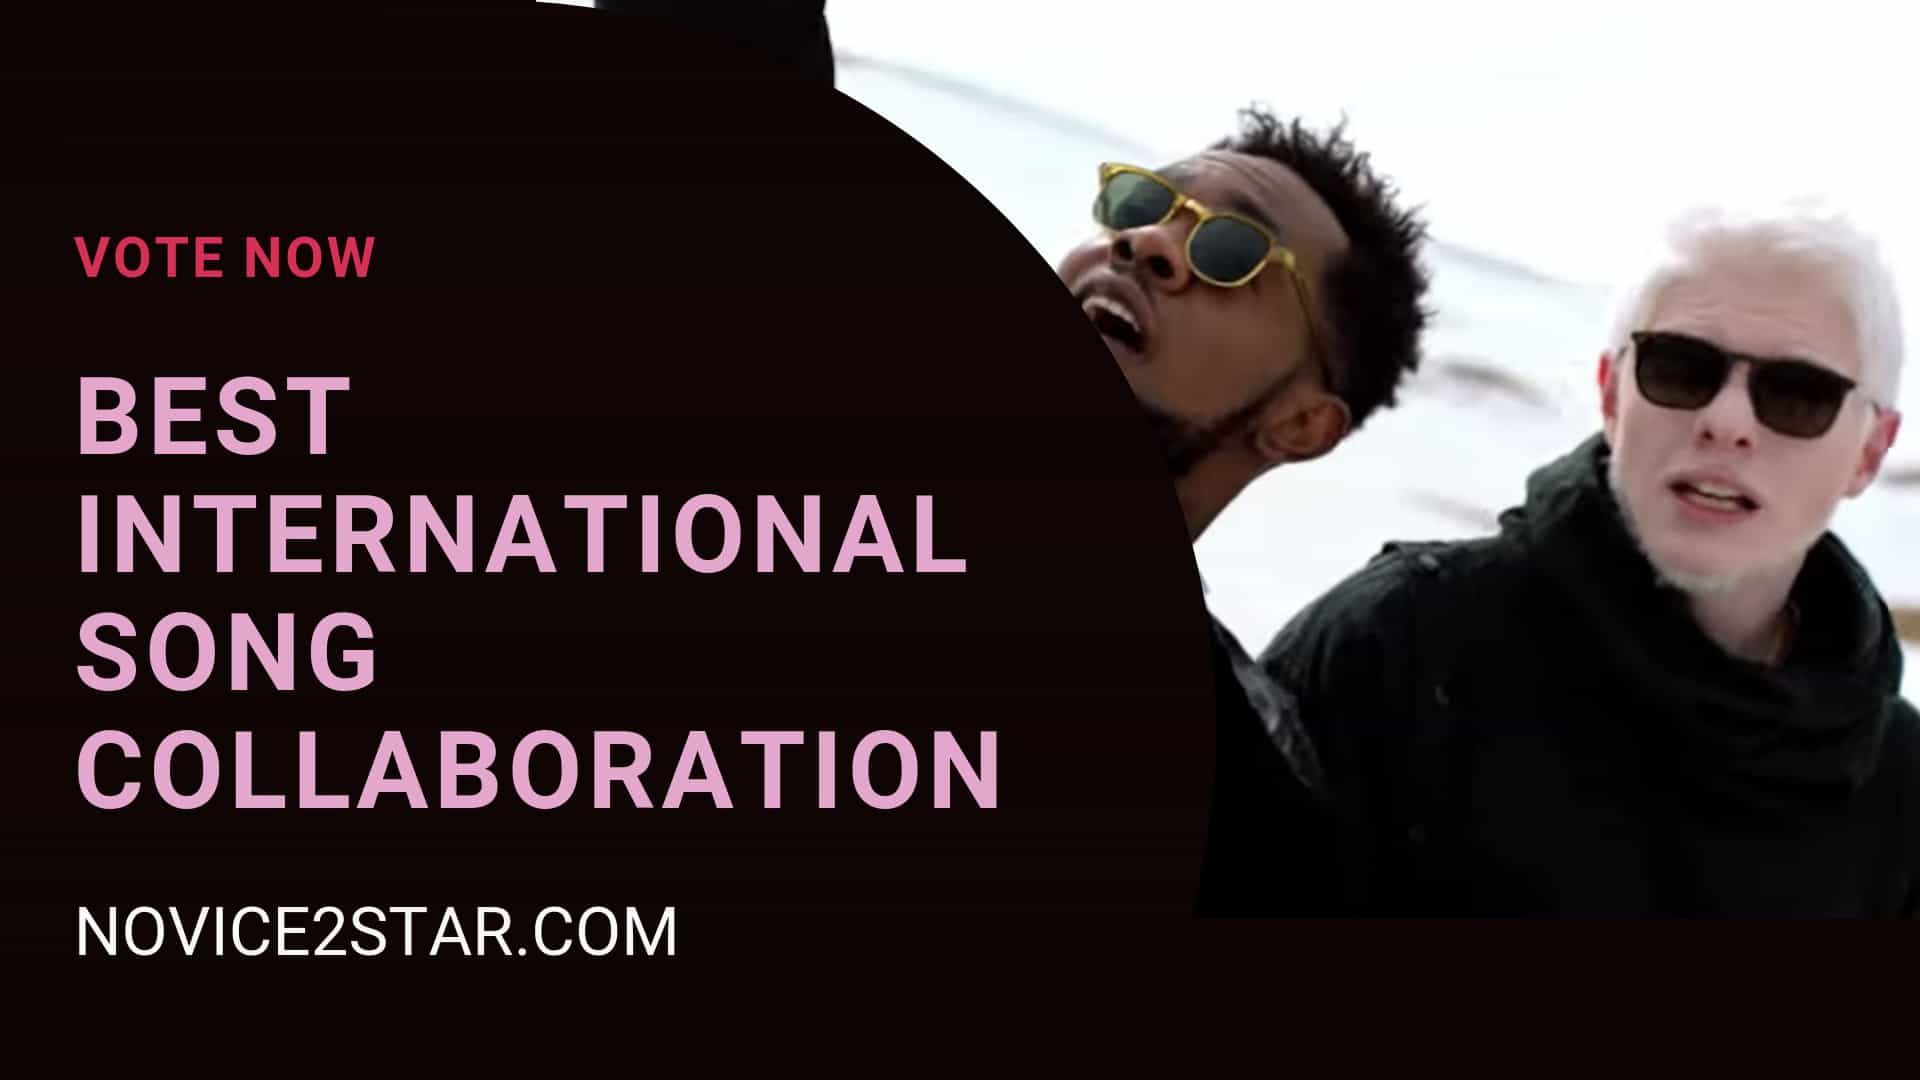 VOTE NOW FOR: Best International Song Collaboration 2018